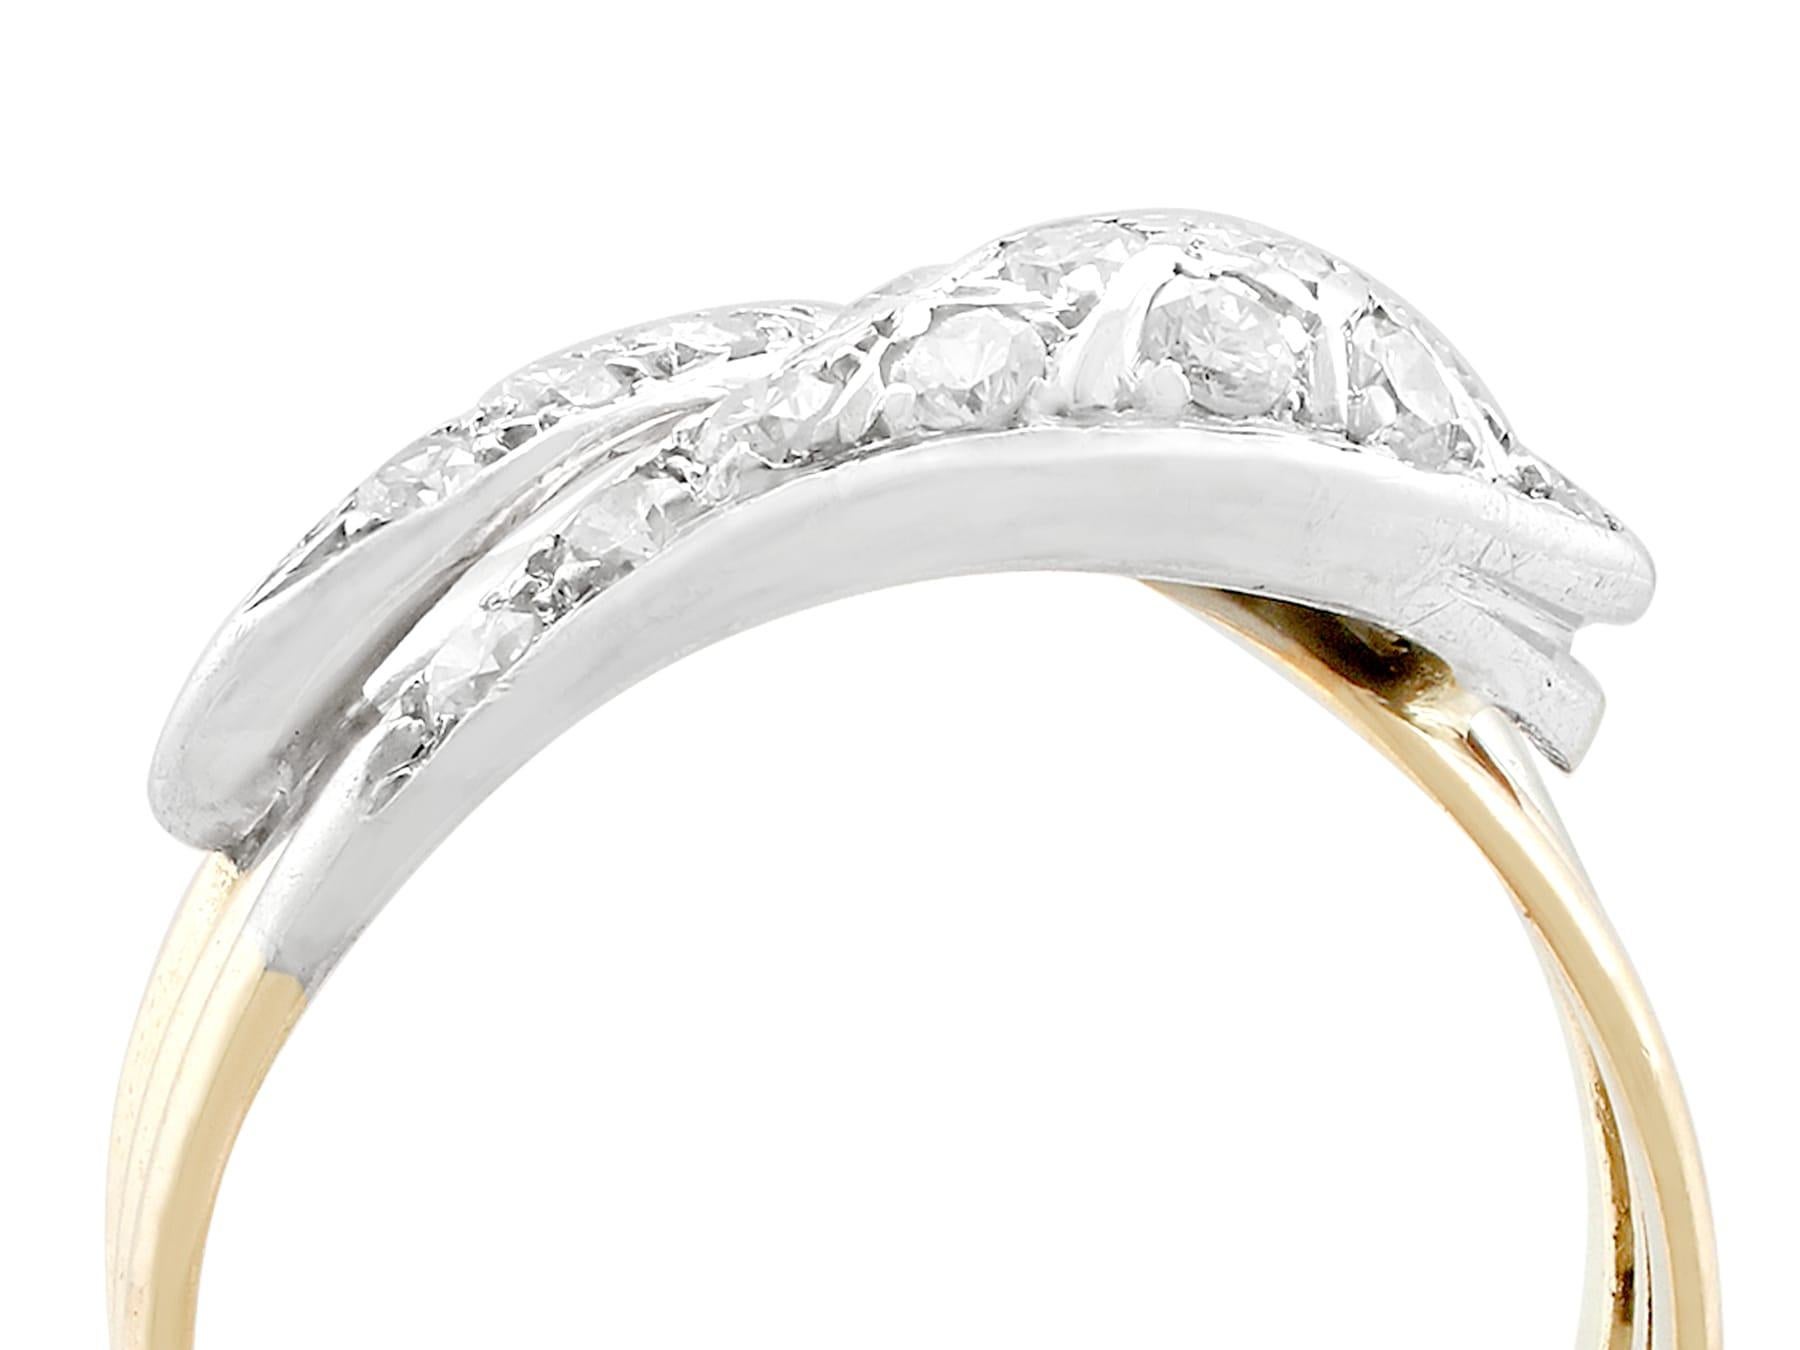 An impressive vintage 0.93 carat diamond and 14 karat yellow gold, 14 karat white gold set 'snake' ring; part of our diverse diamond jewelry and estate jewelry collections.

This fine and impressive diamond snake ring has been crafted in 14k yellow